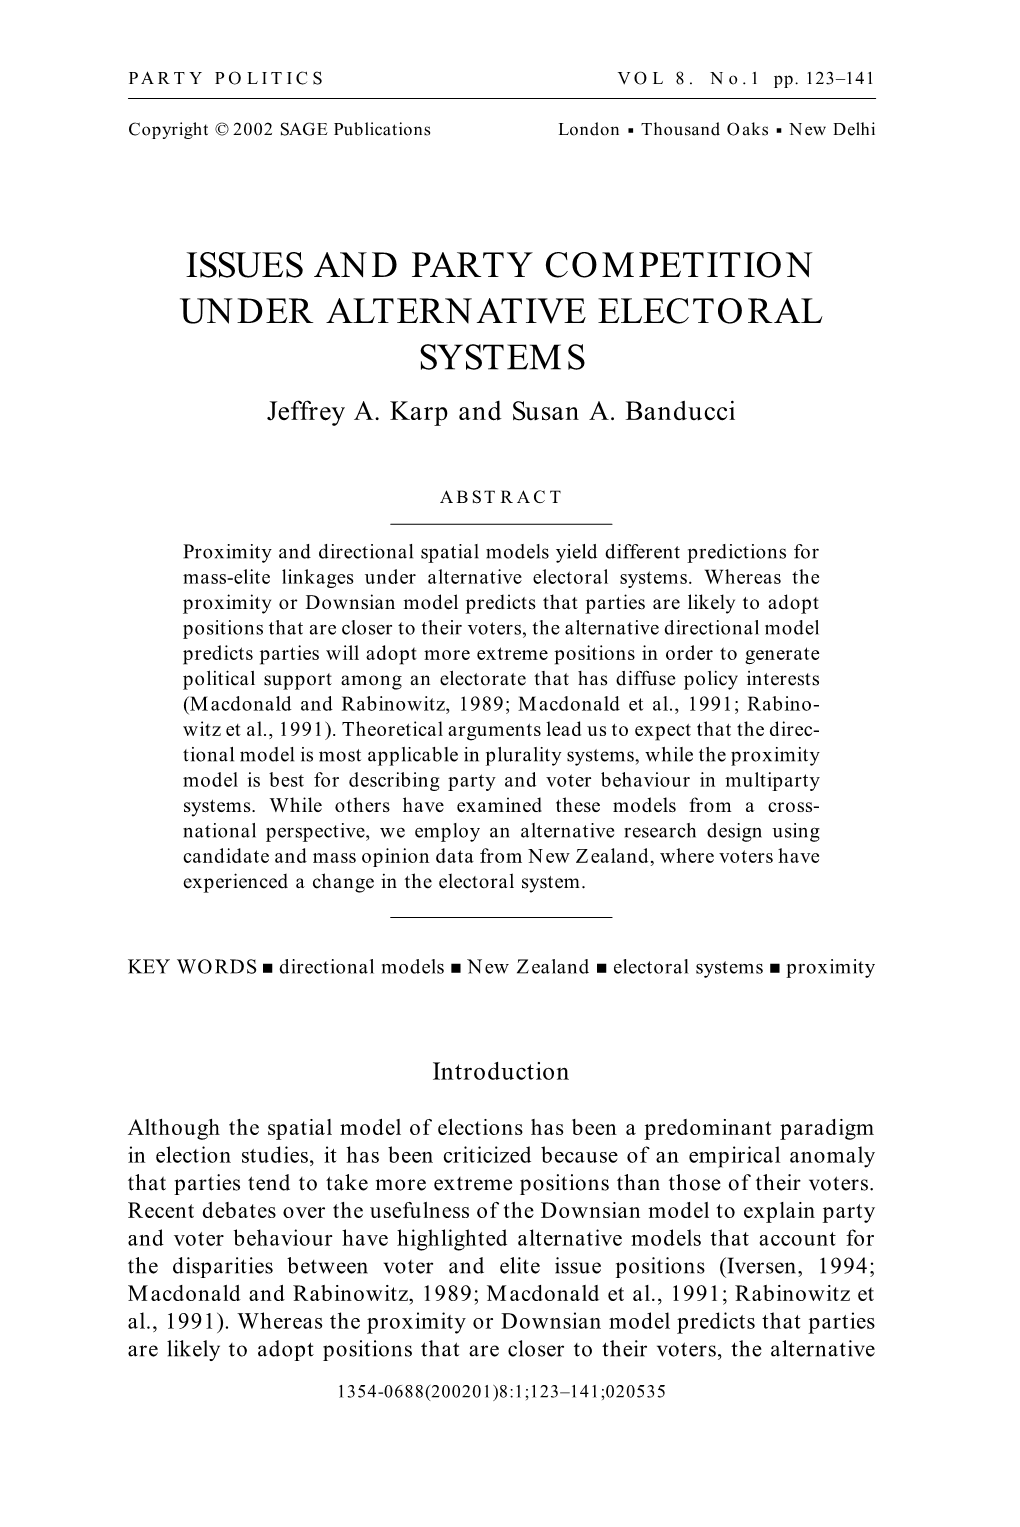 ISSUES and PARTY COMPETITION UNDER ALTERNATIVE ELECTORAL SYSTEMS Jeffrey A